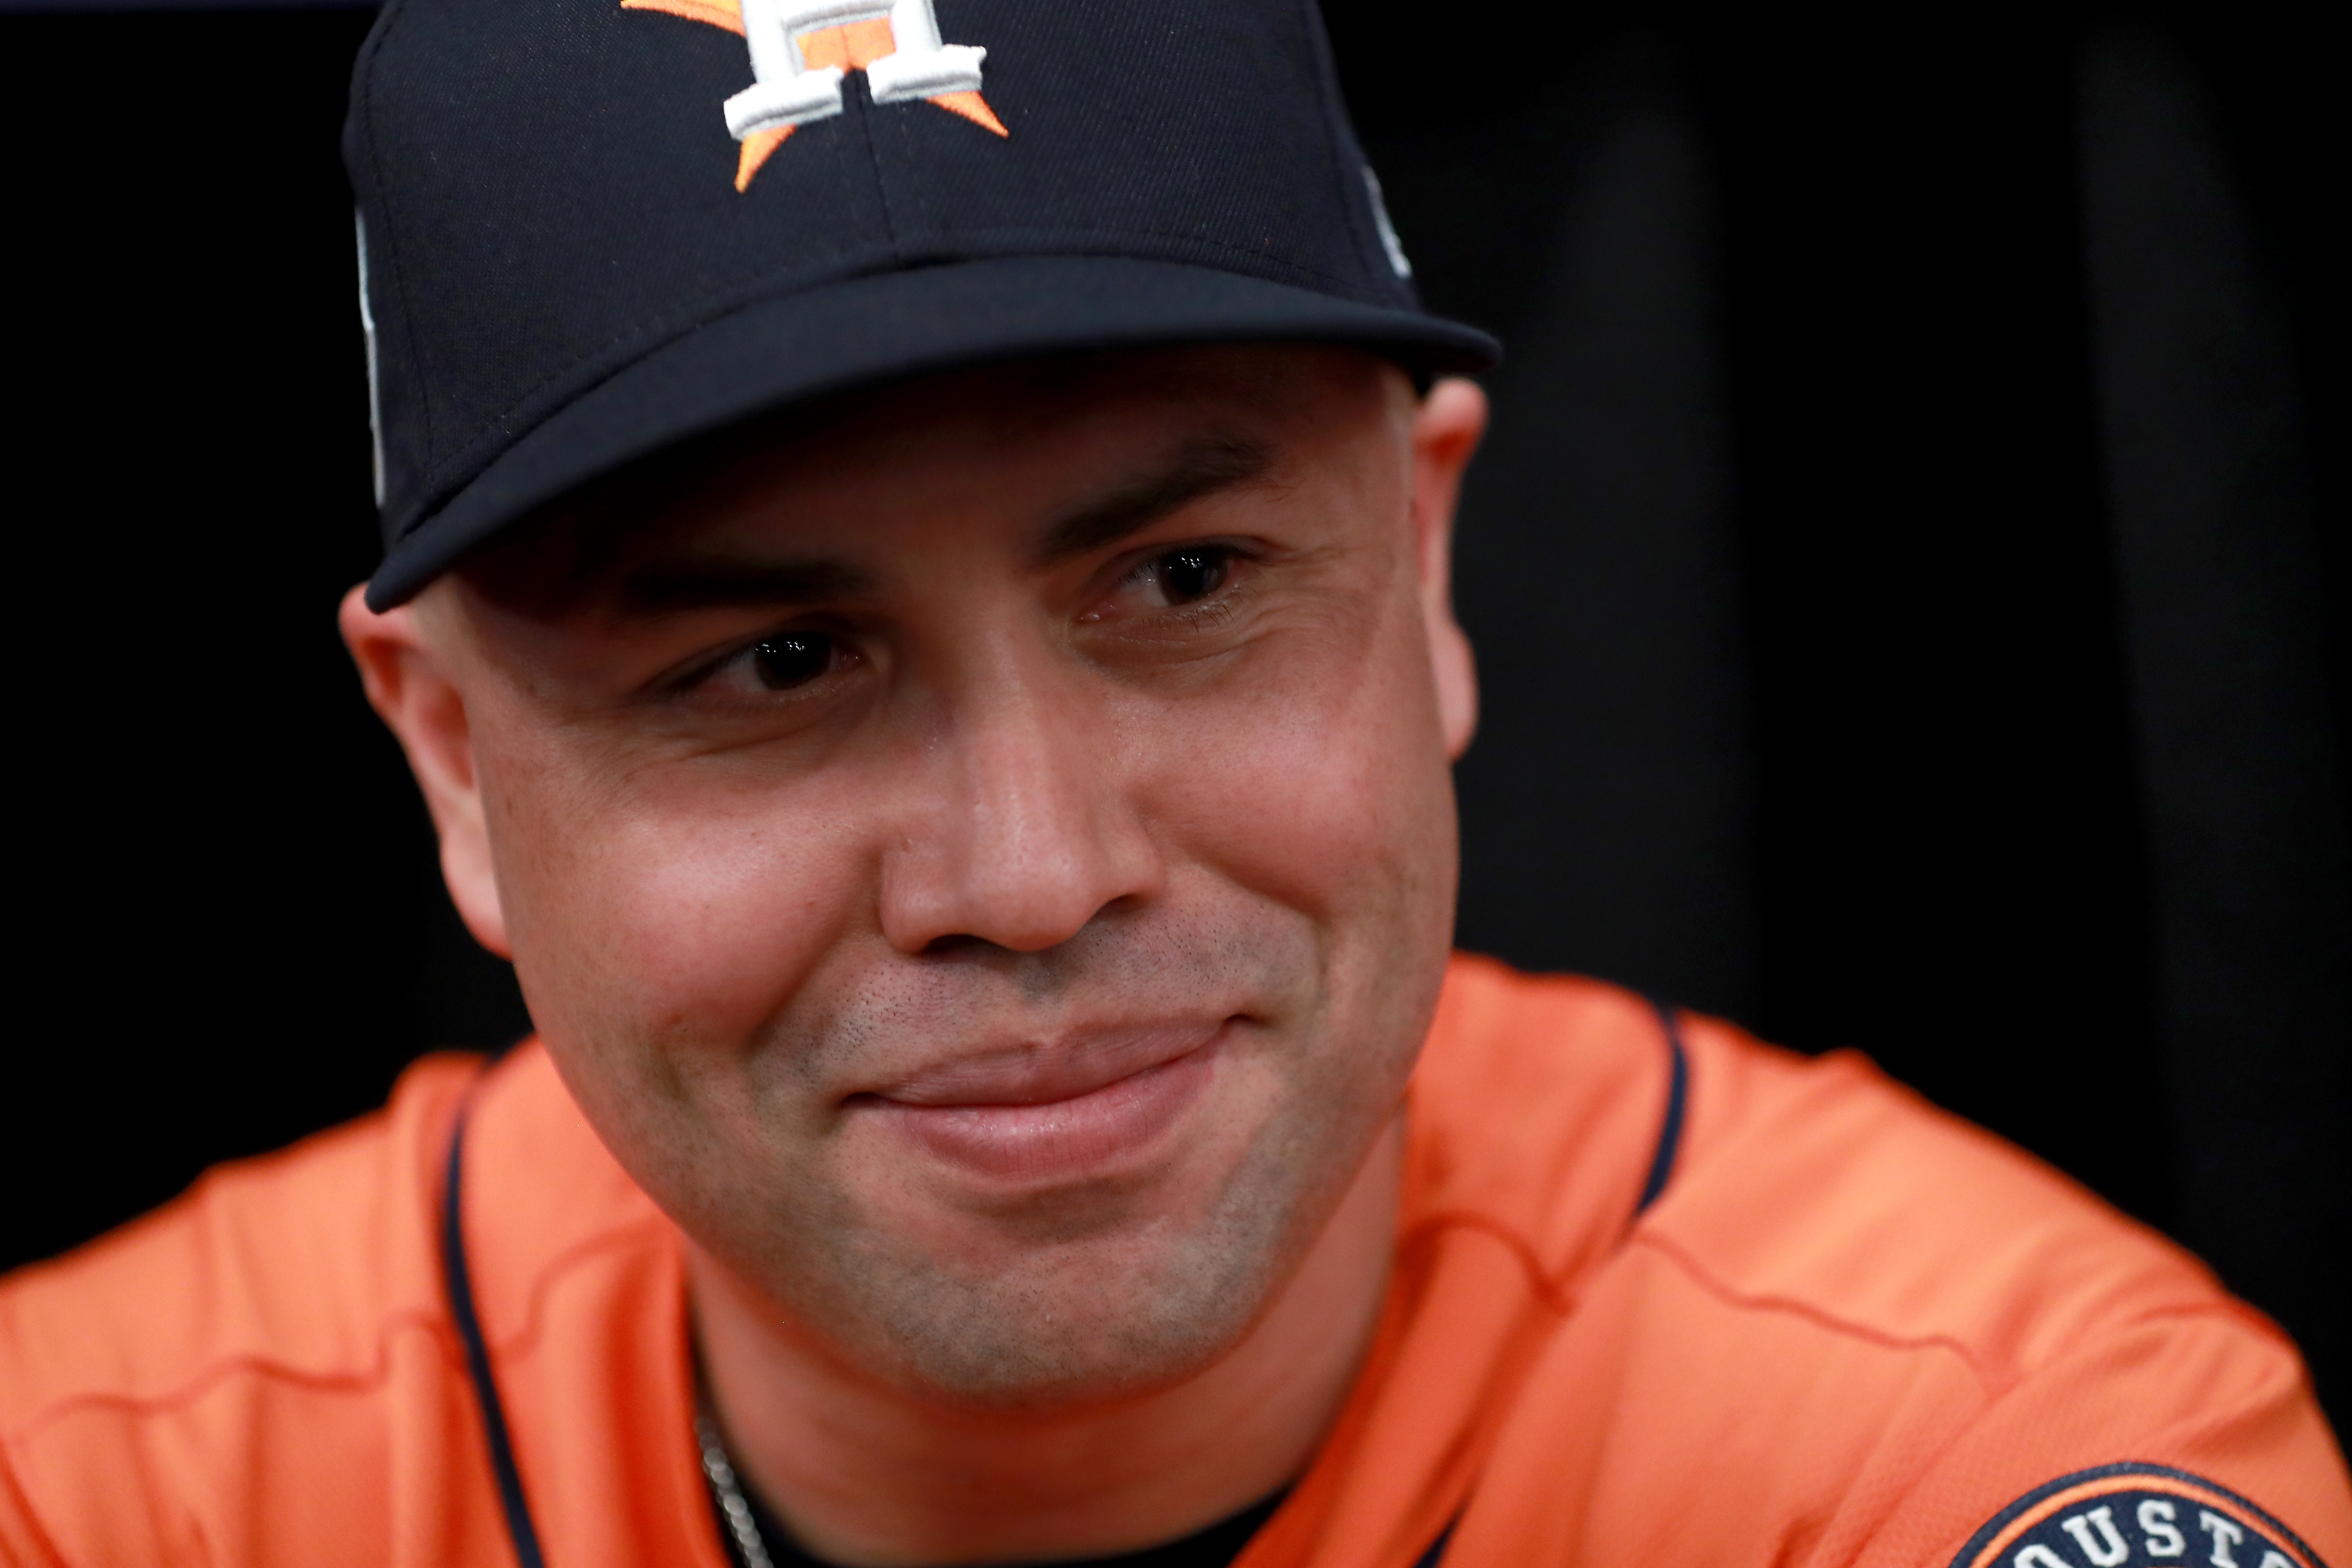 Will Carlos Beltran become the second Royals-developed player in